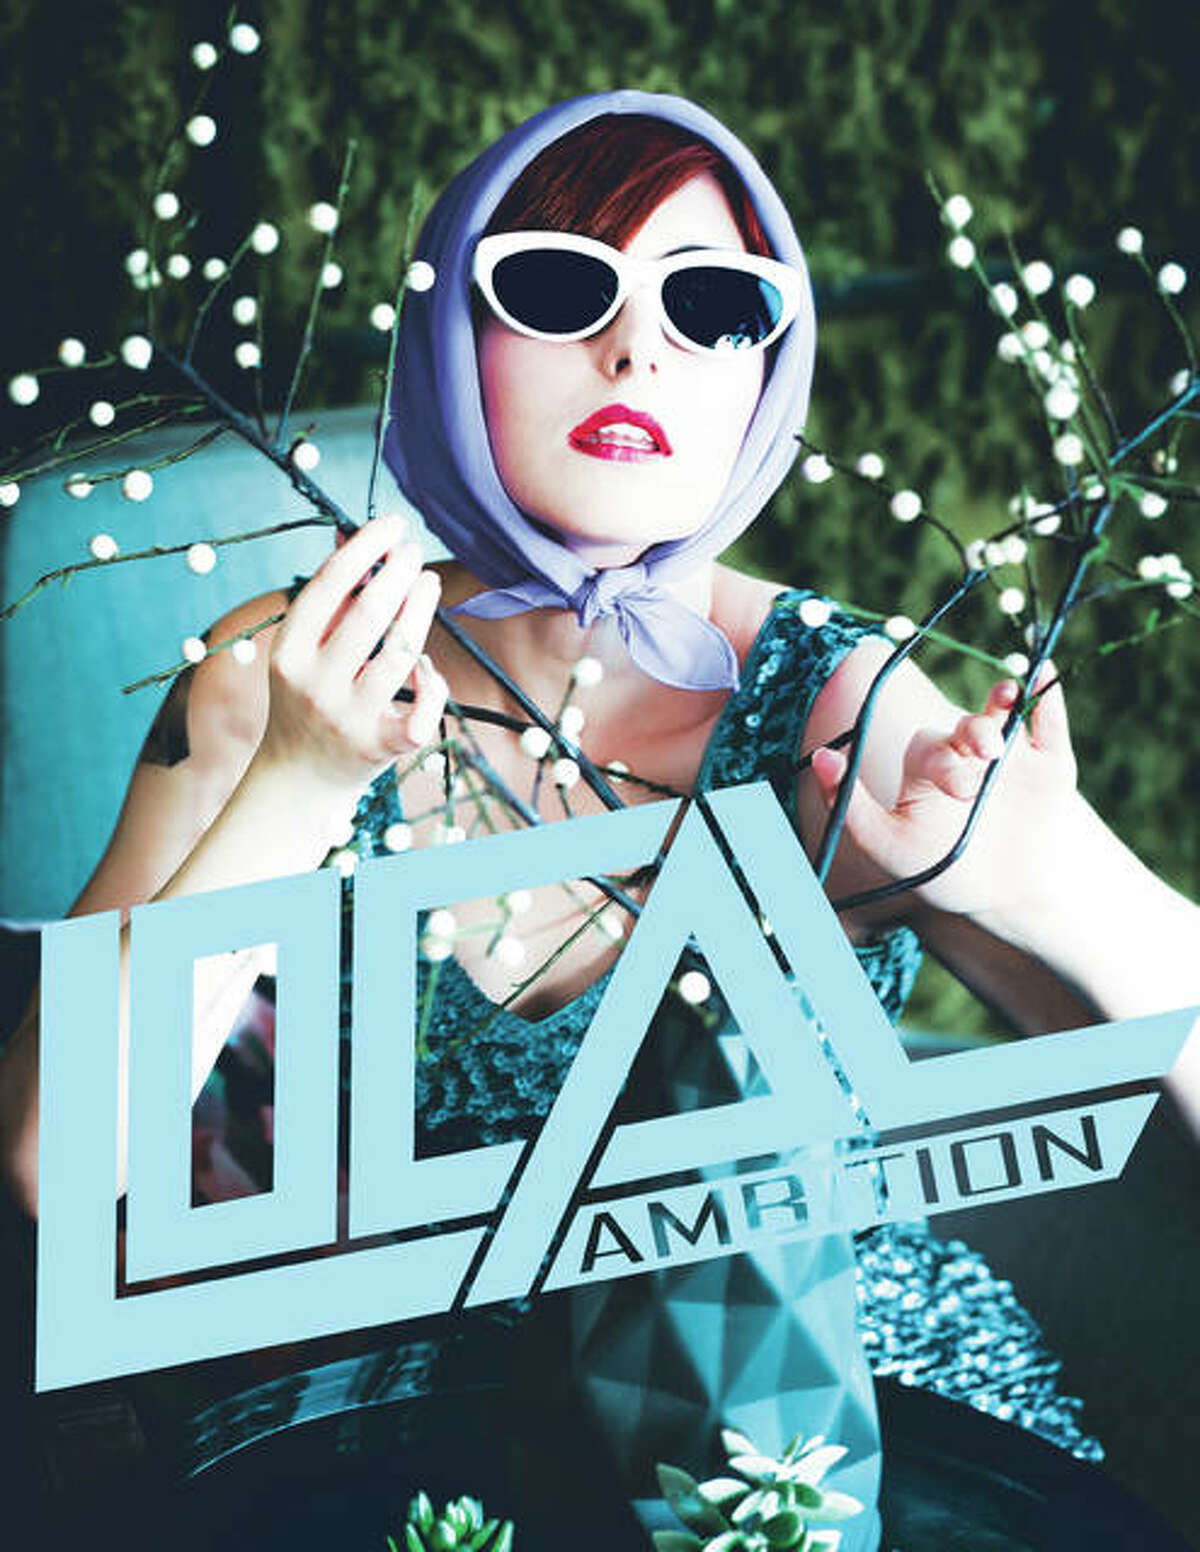 Model Caterina Clayton, last year’s winner of “Local Ambition’s” competition graces the cover of the first issue of Local Ambition magazine, published November 2019. The Local Ambition magazine is available at www.alwayslatetv.com and sold through MagCloud, available in digital and print.